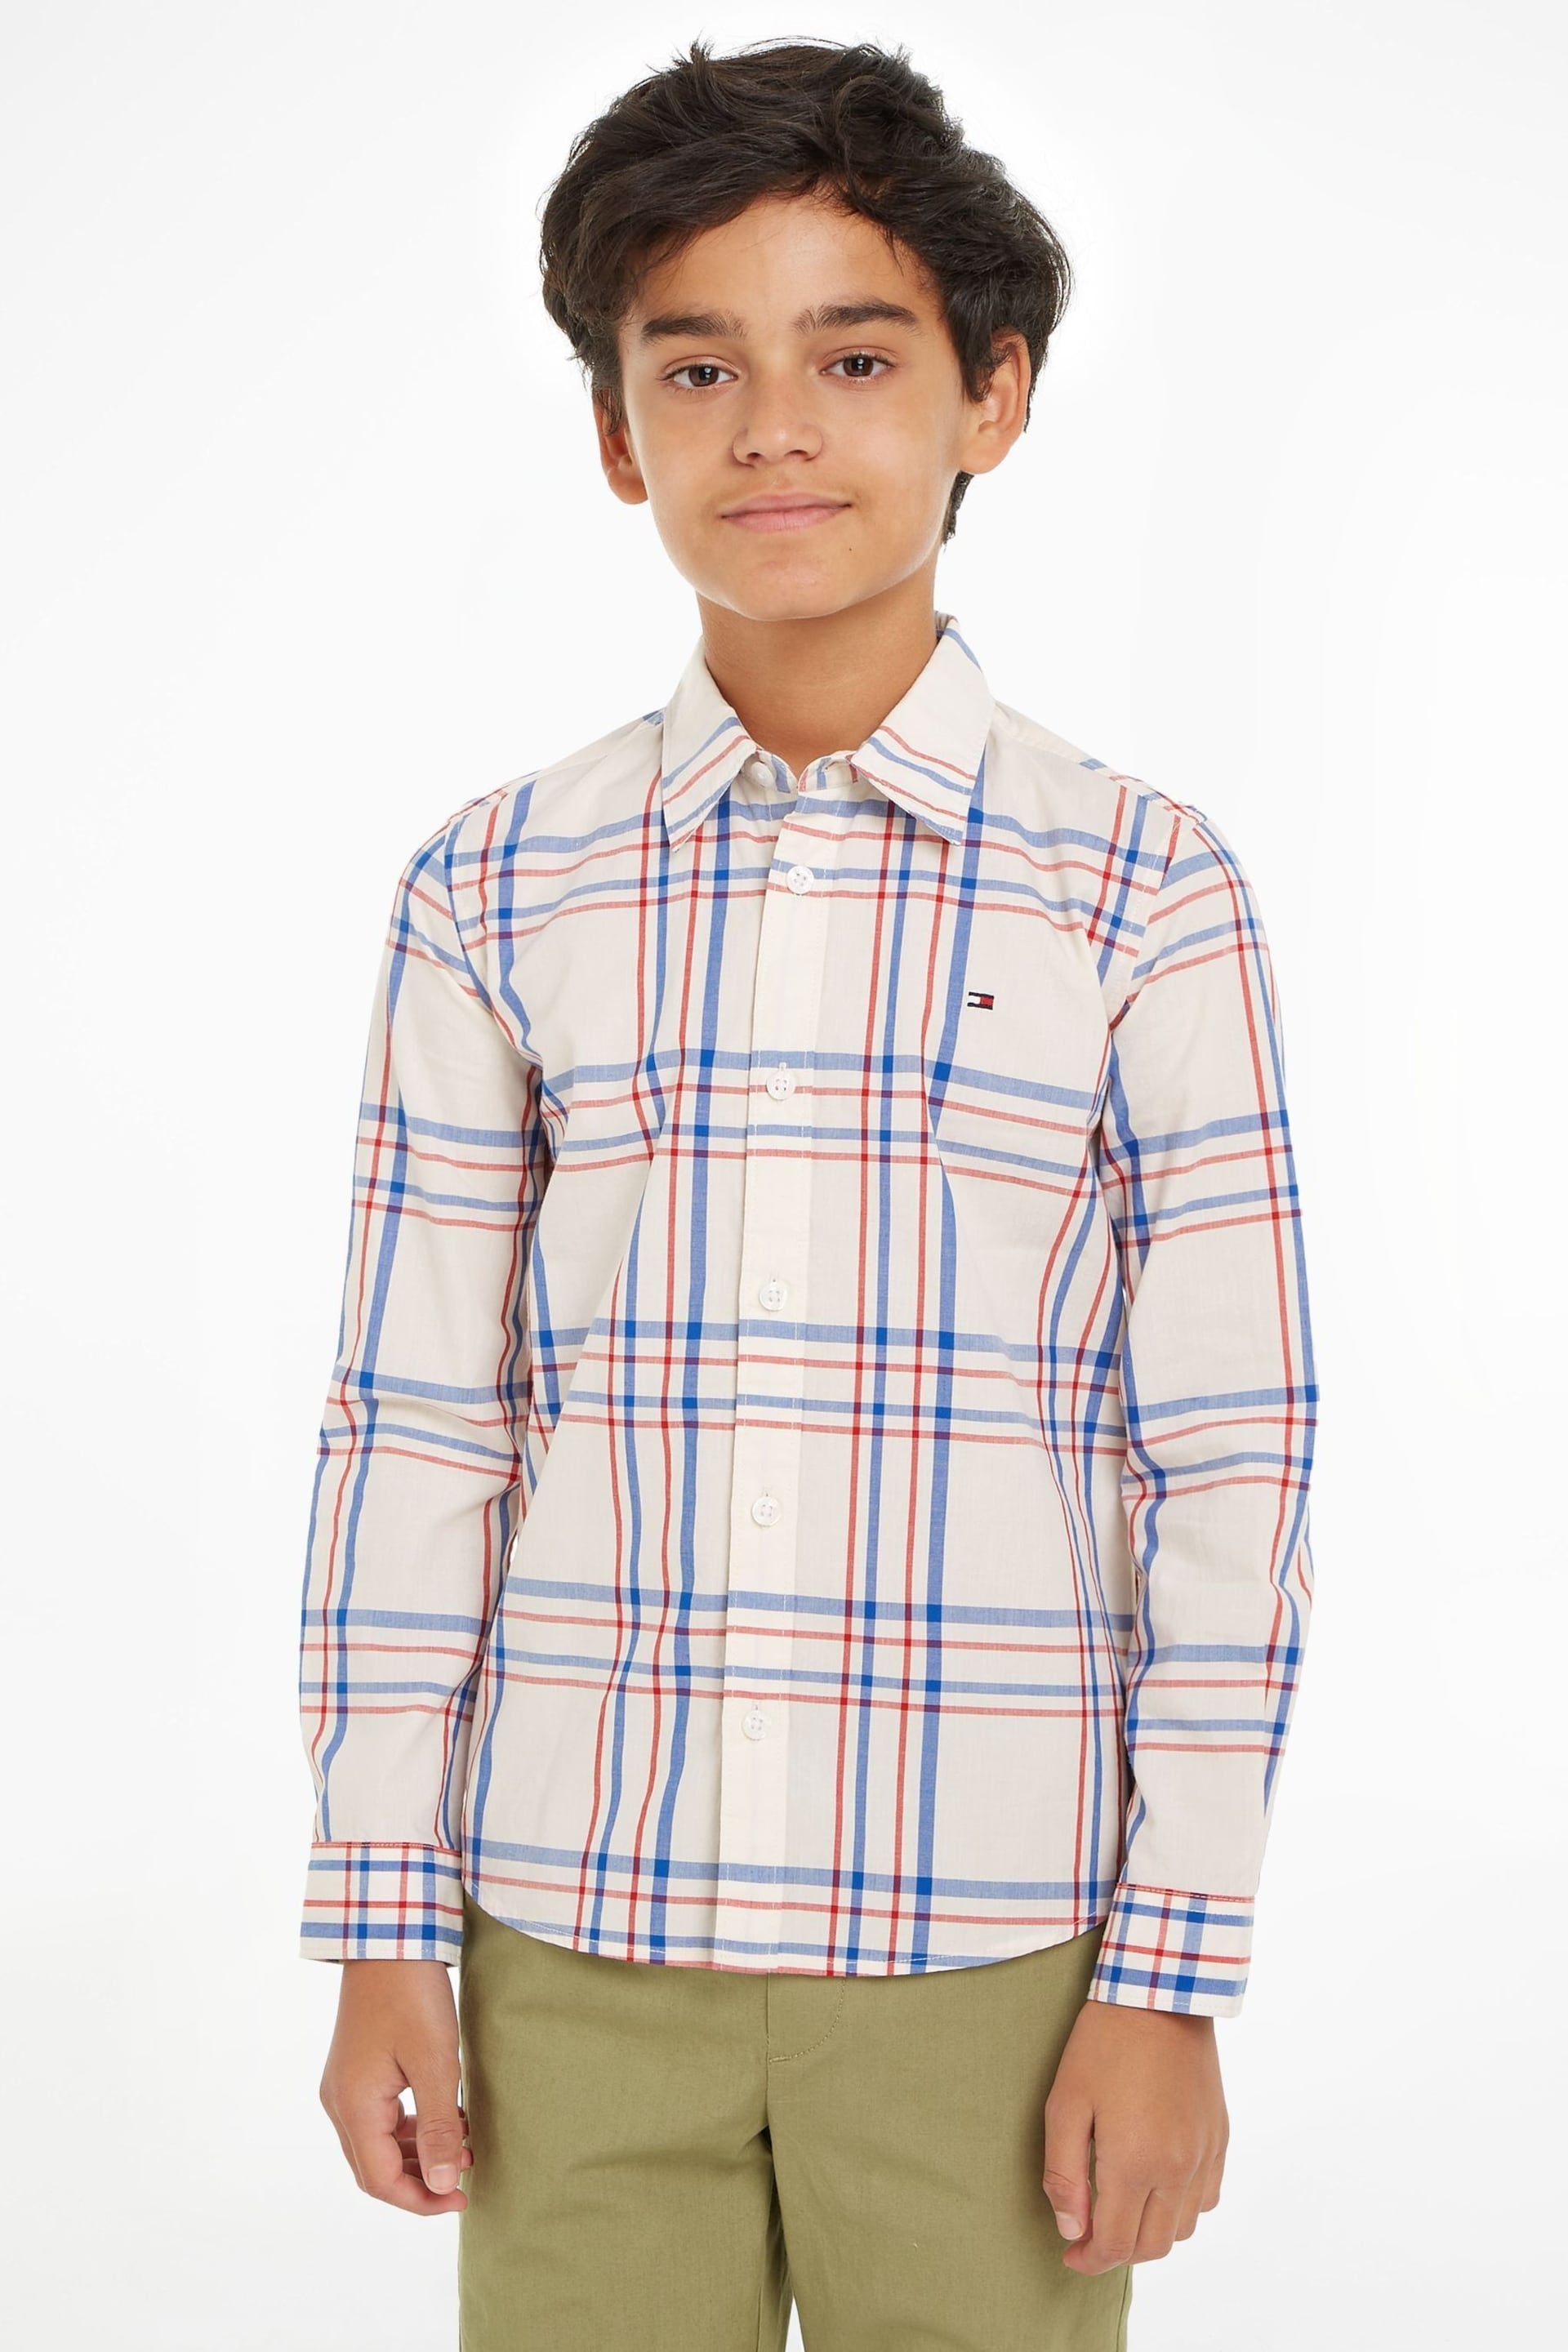 Tommy Hilfiger Long Sleeve White Check Shirt - Image 1 of 6